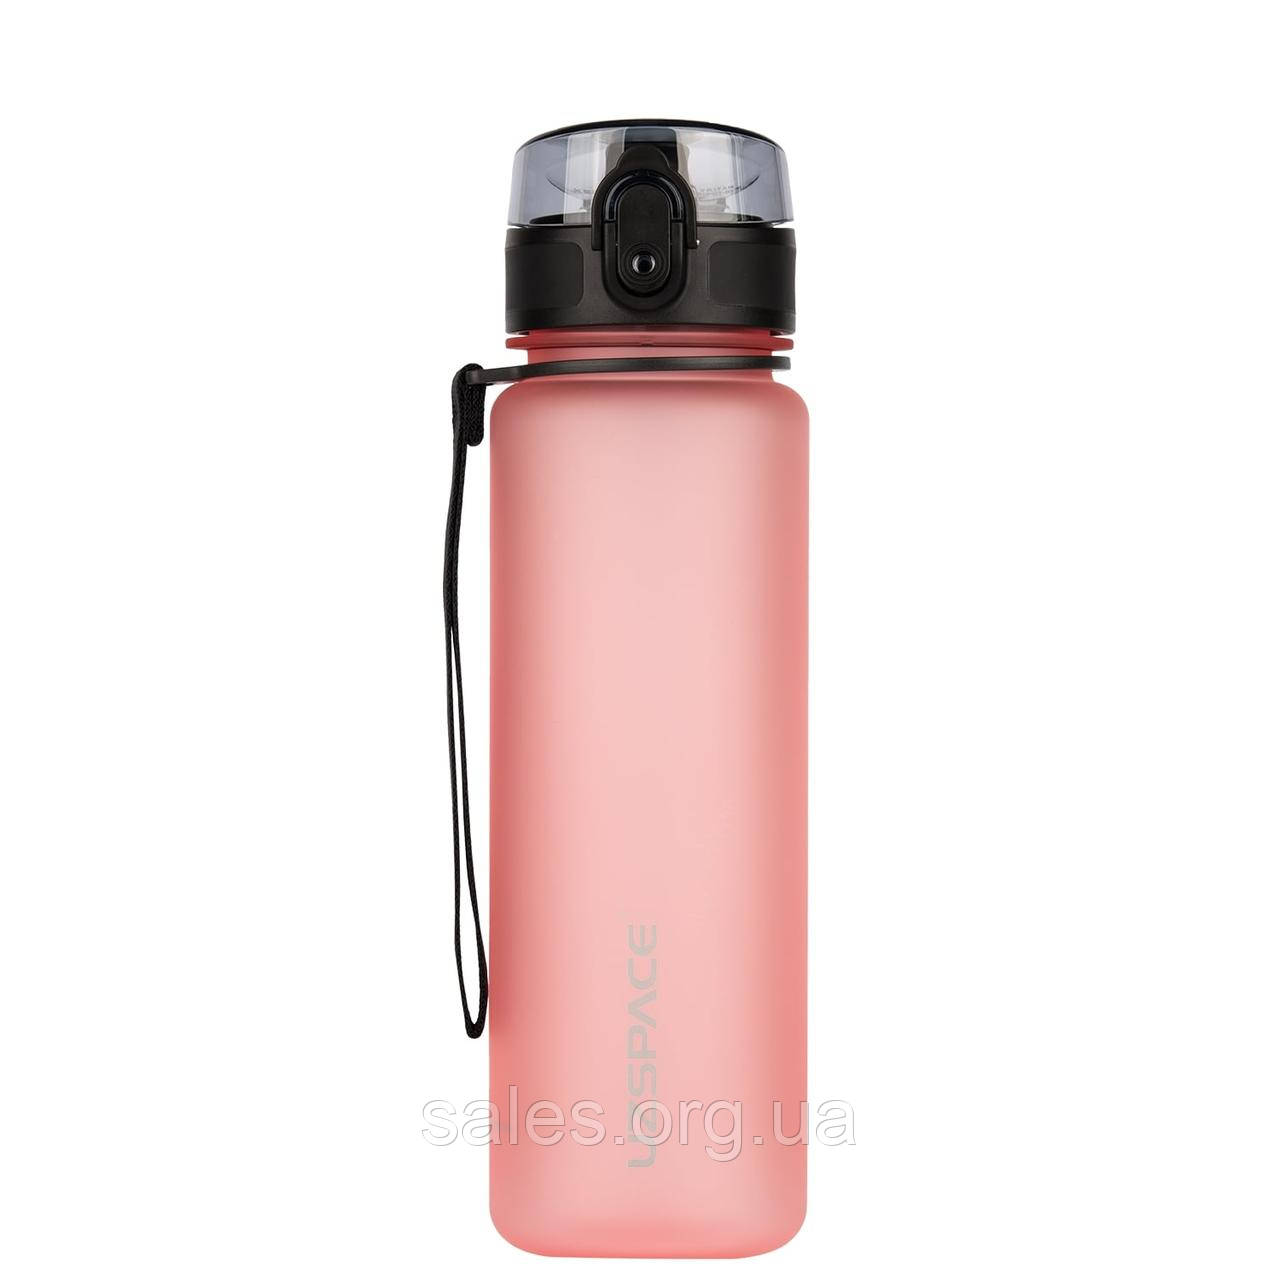 Фляга UZspace Colorful Frosted 3026 500 ml Coral SC, код: 7548191